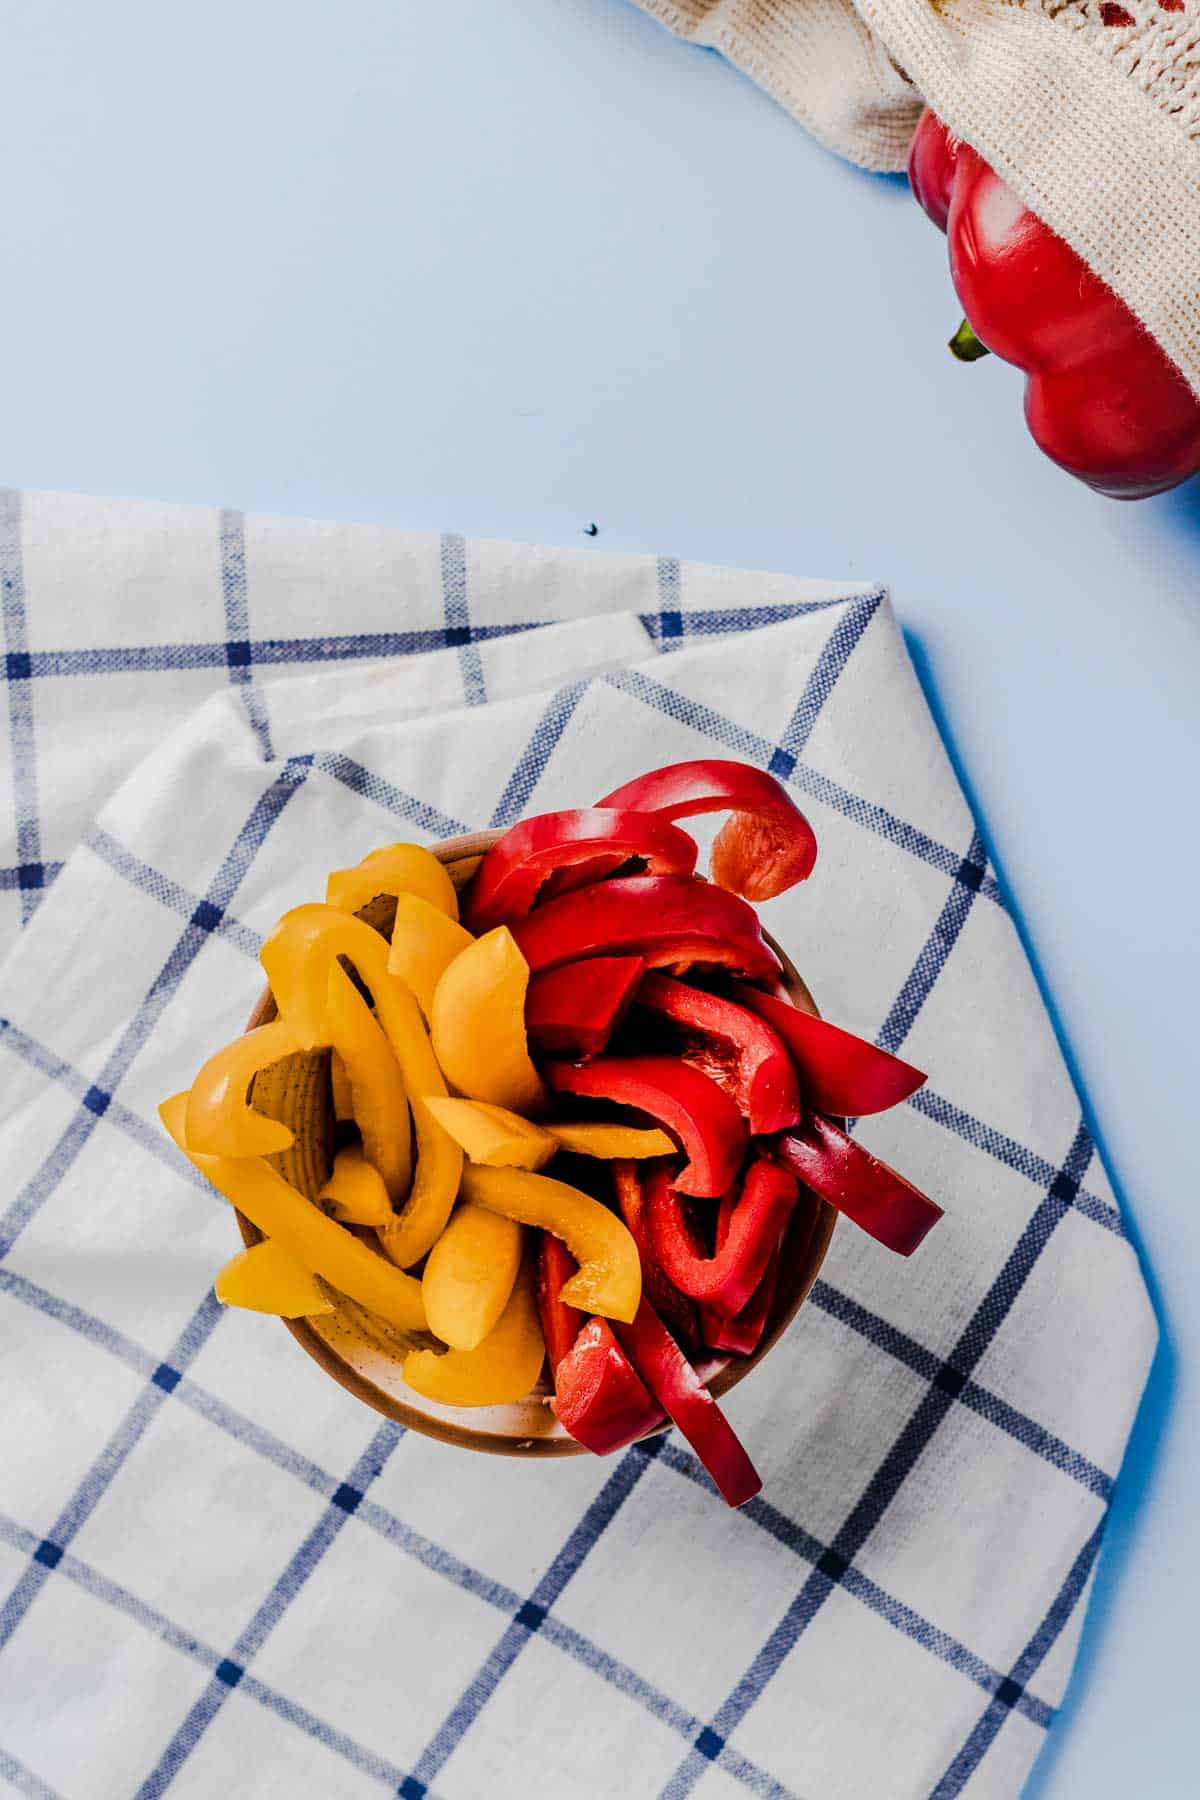 Birds eye view of sliced red and yellow bell peppers in a small bowl.